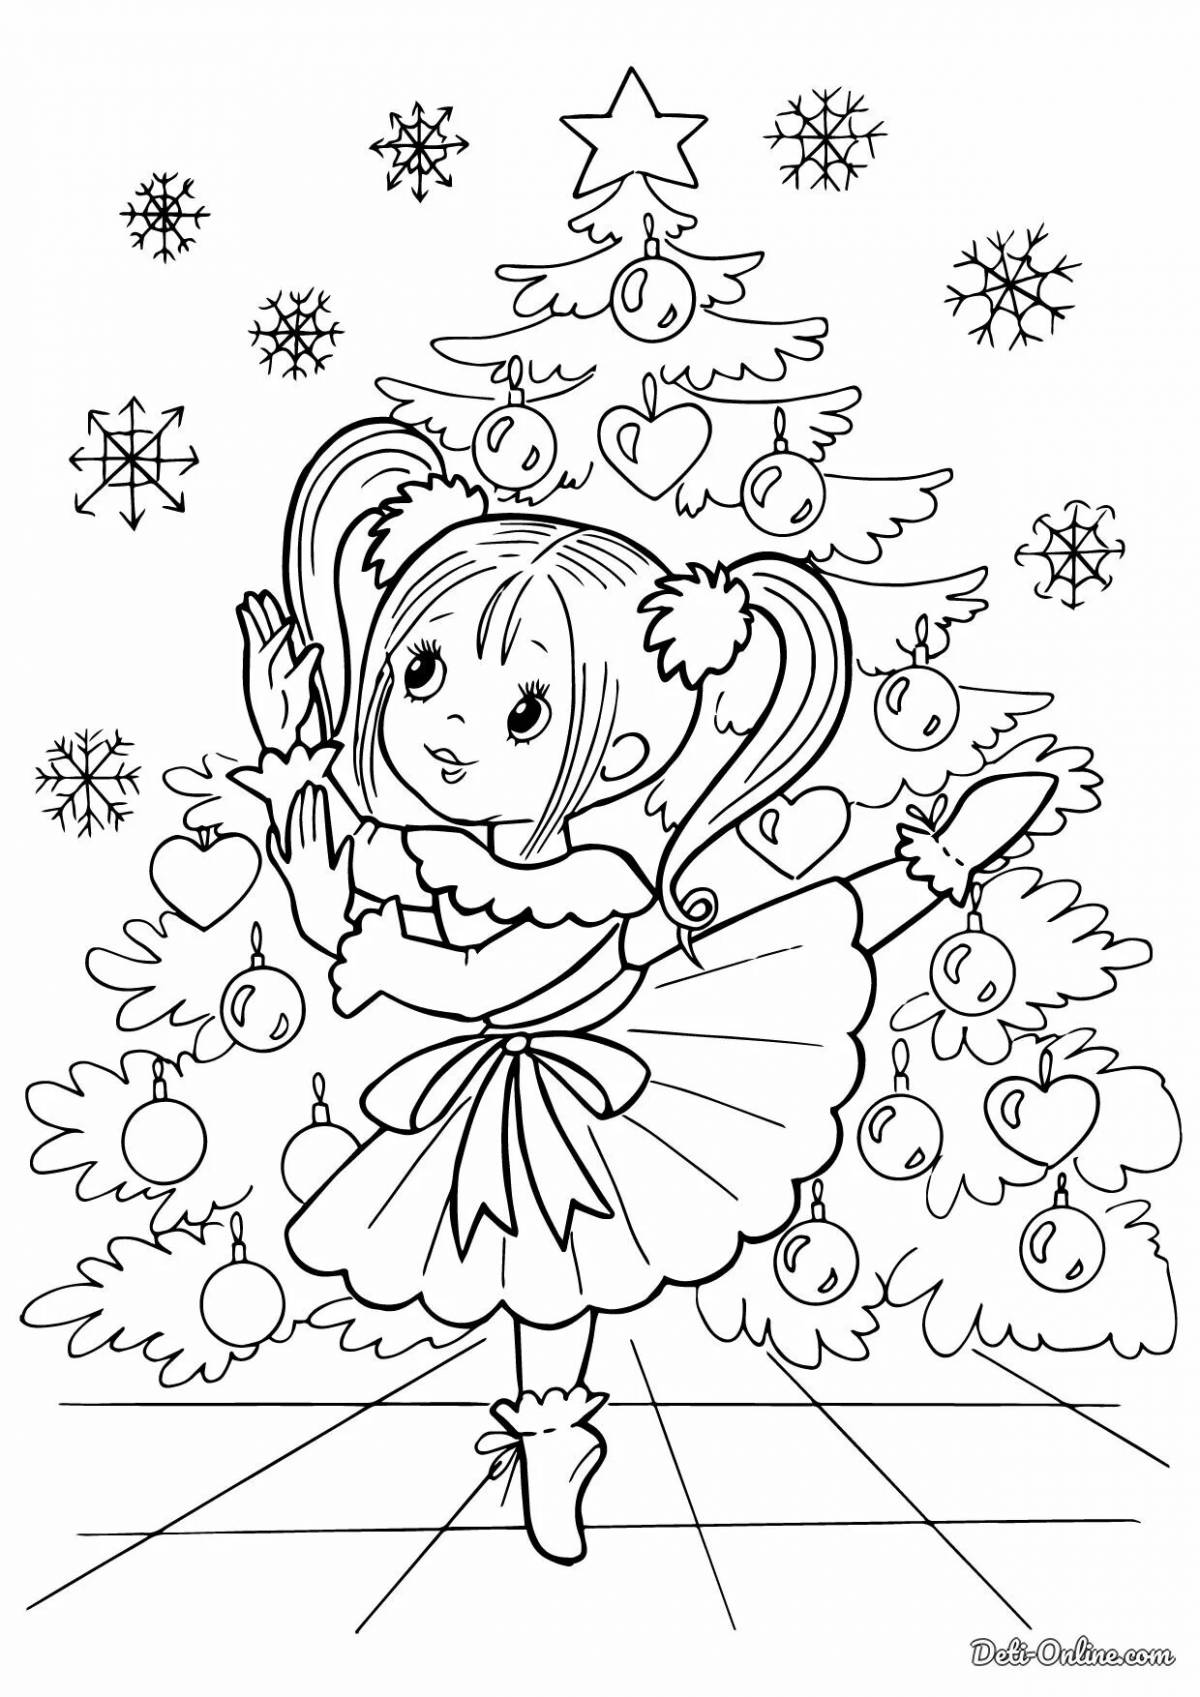 Colorful and detailed Christmas coloring book for kids